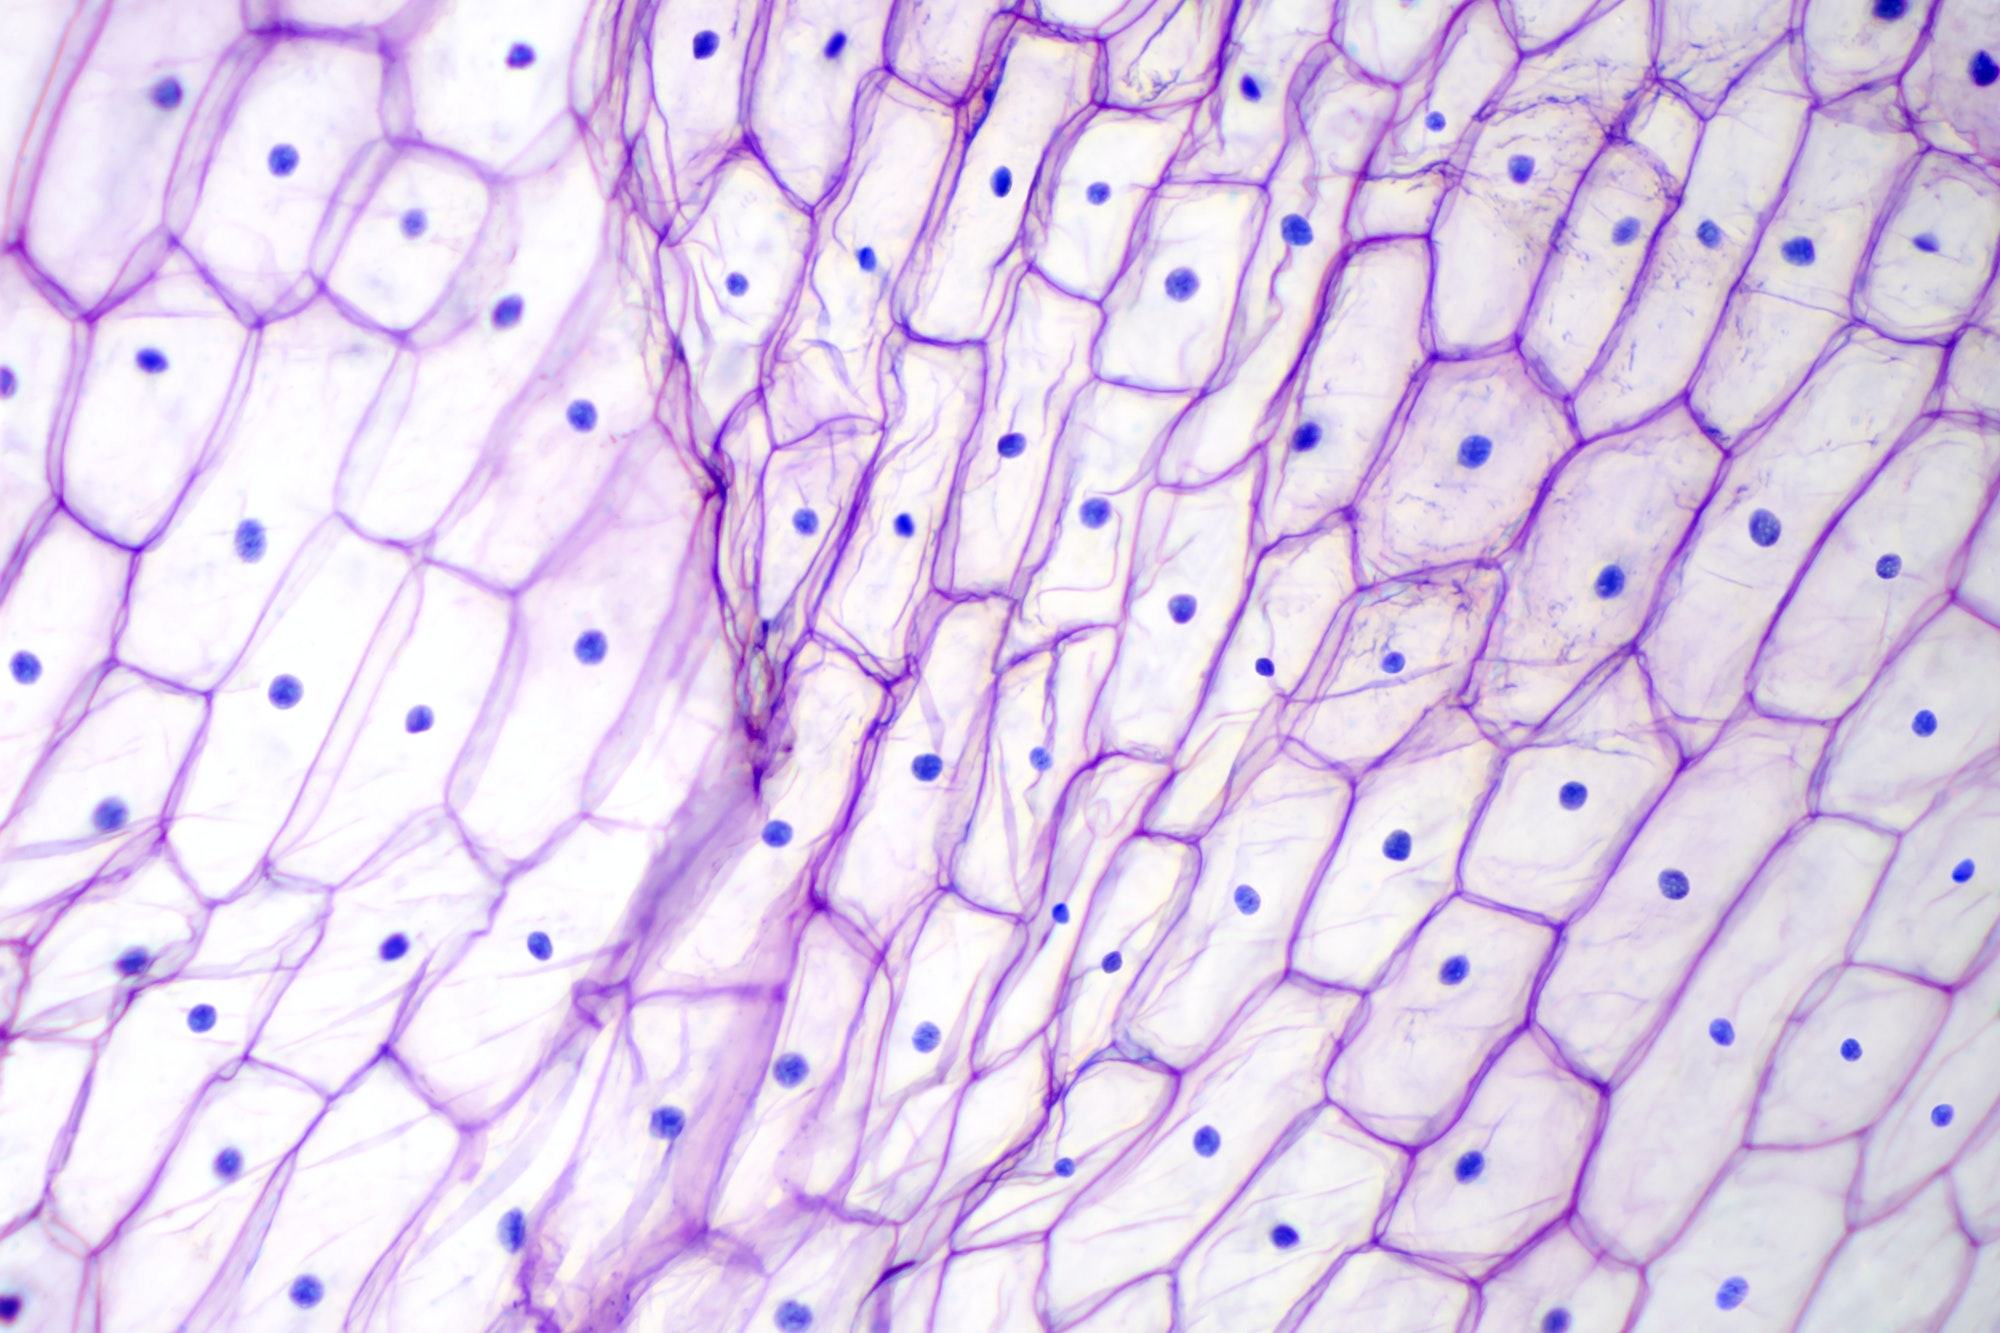 Onion epidermis with large cells under microscope